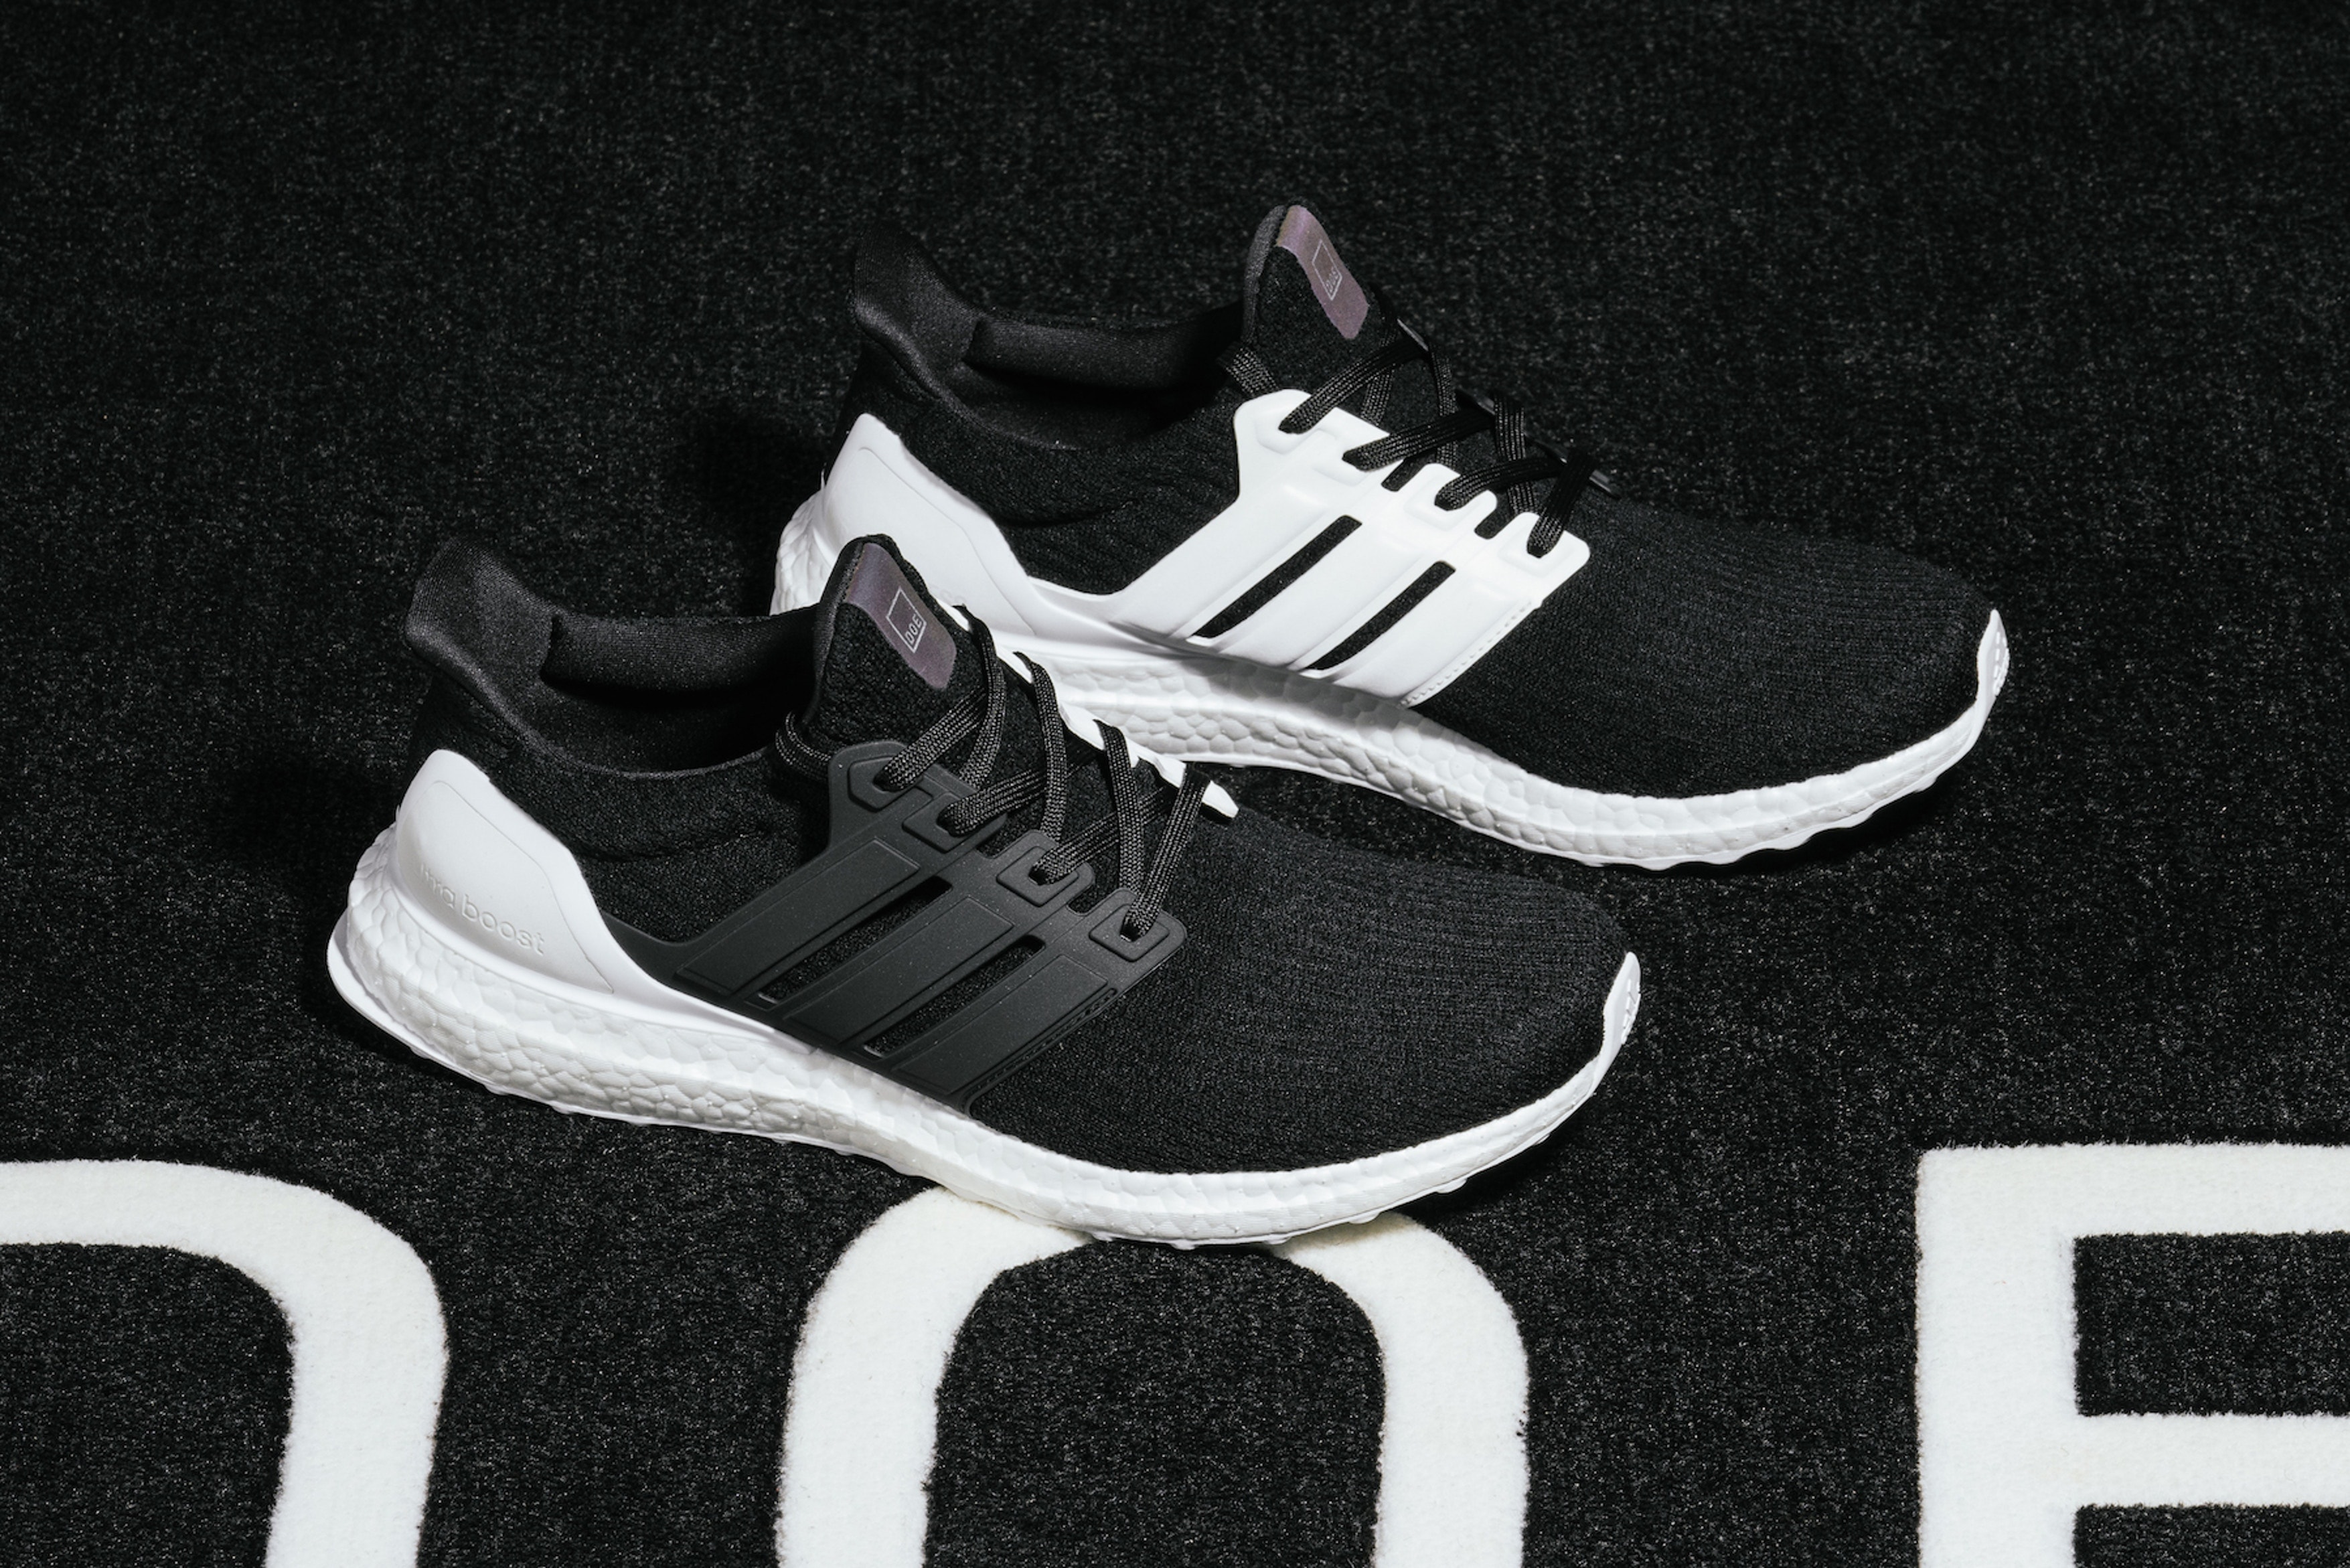 DOE adidas UltraBOOST XENO collaboration black white april may 2018 release date info drop sneakers shoes footwear miadidas 100 pairs limited shanghai